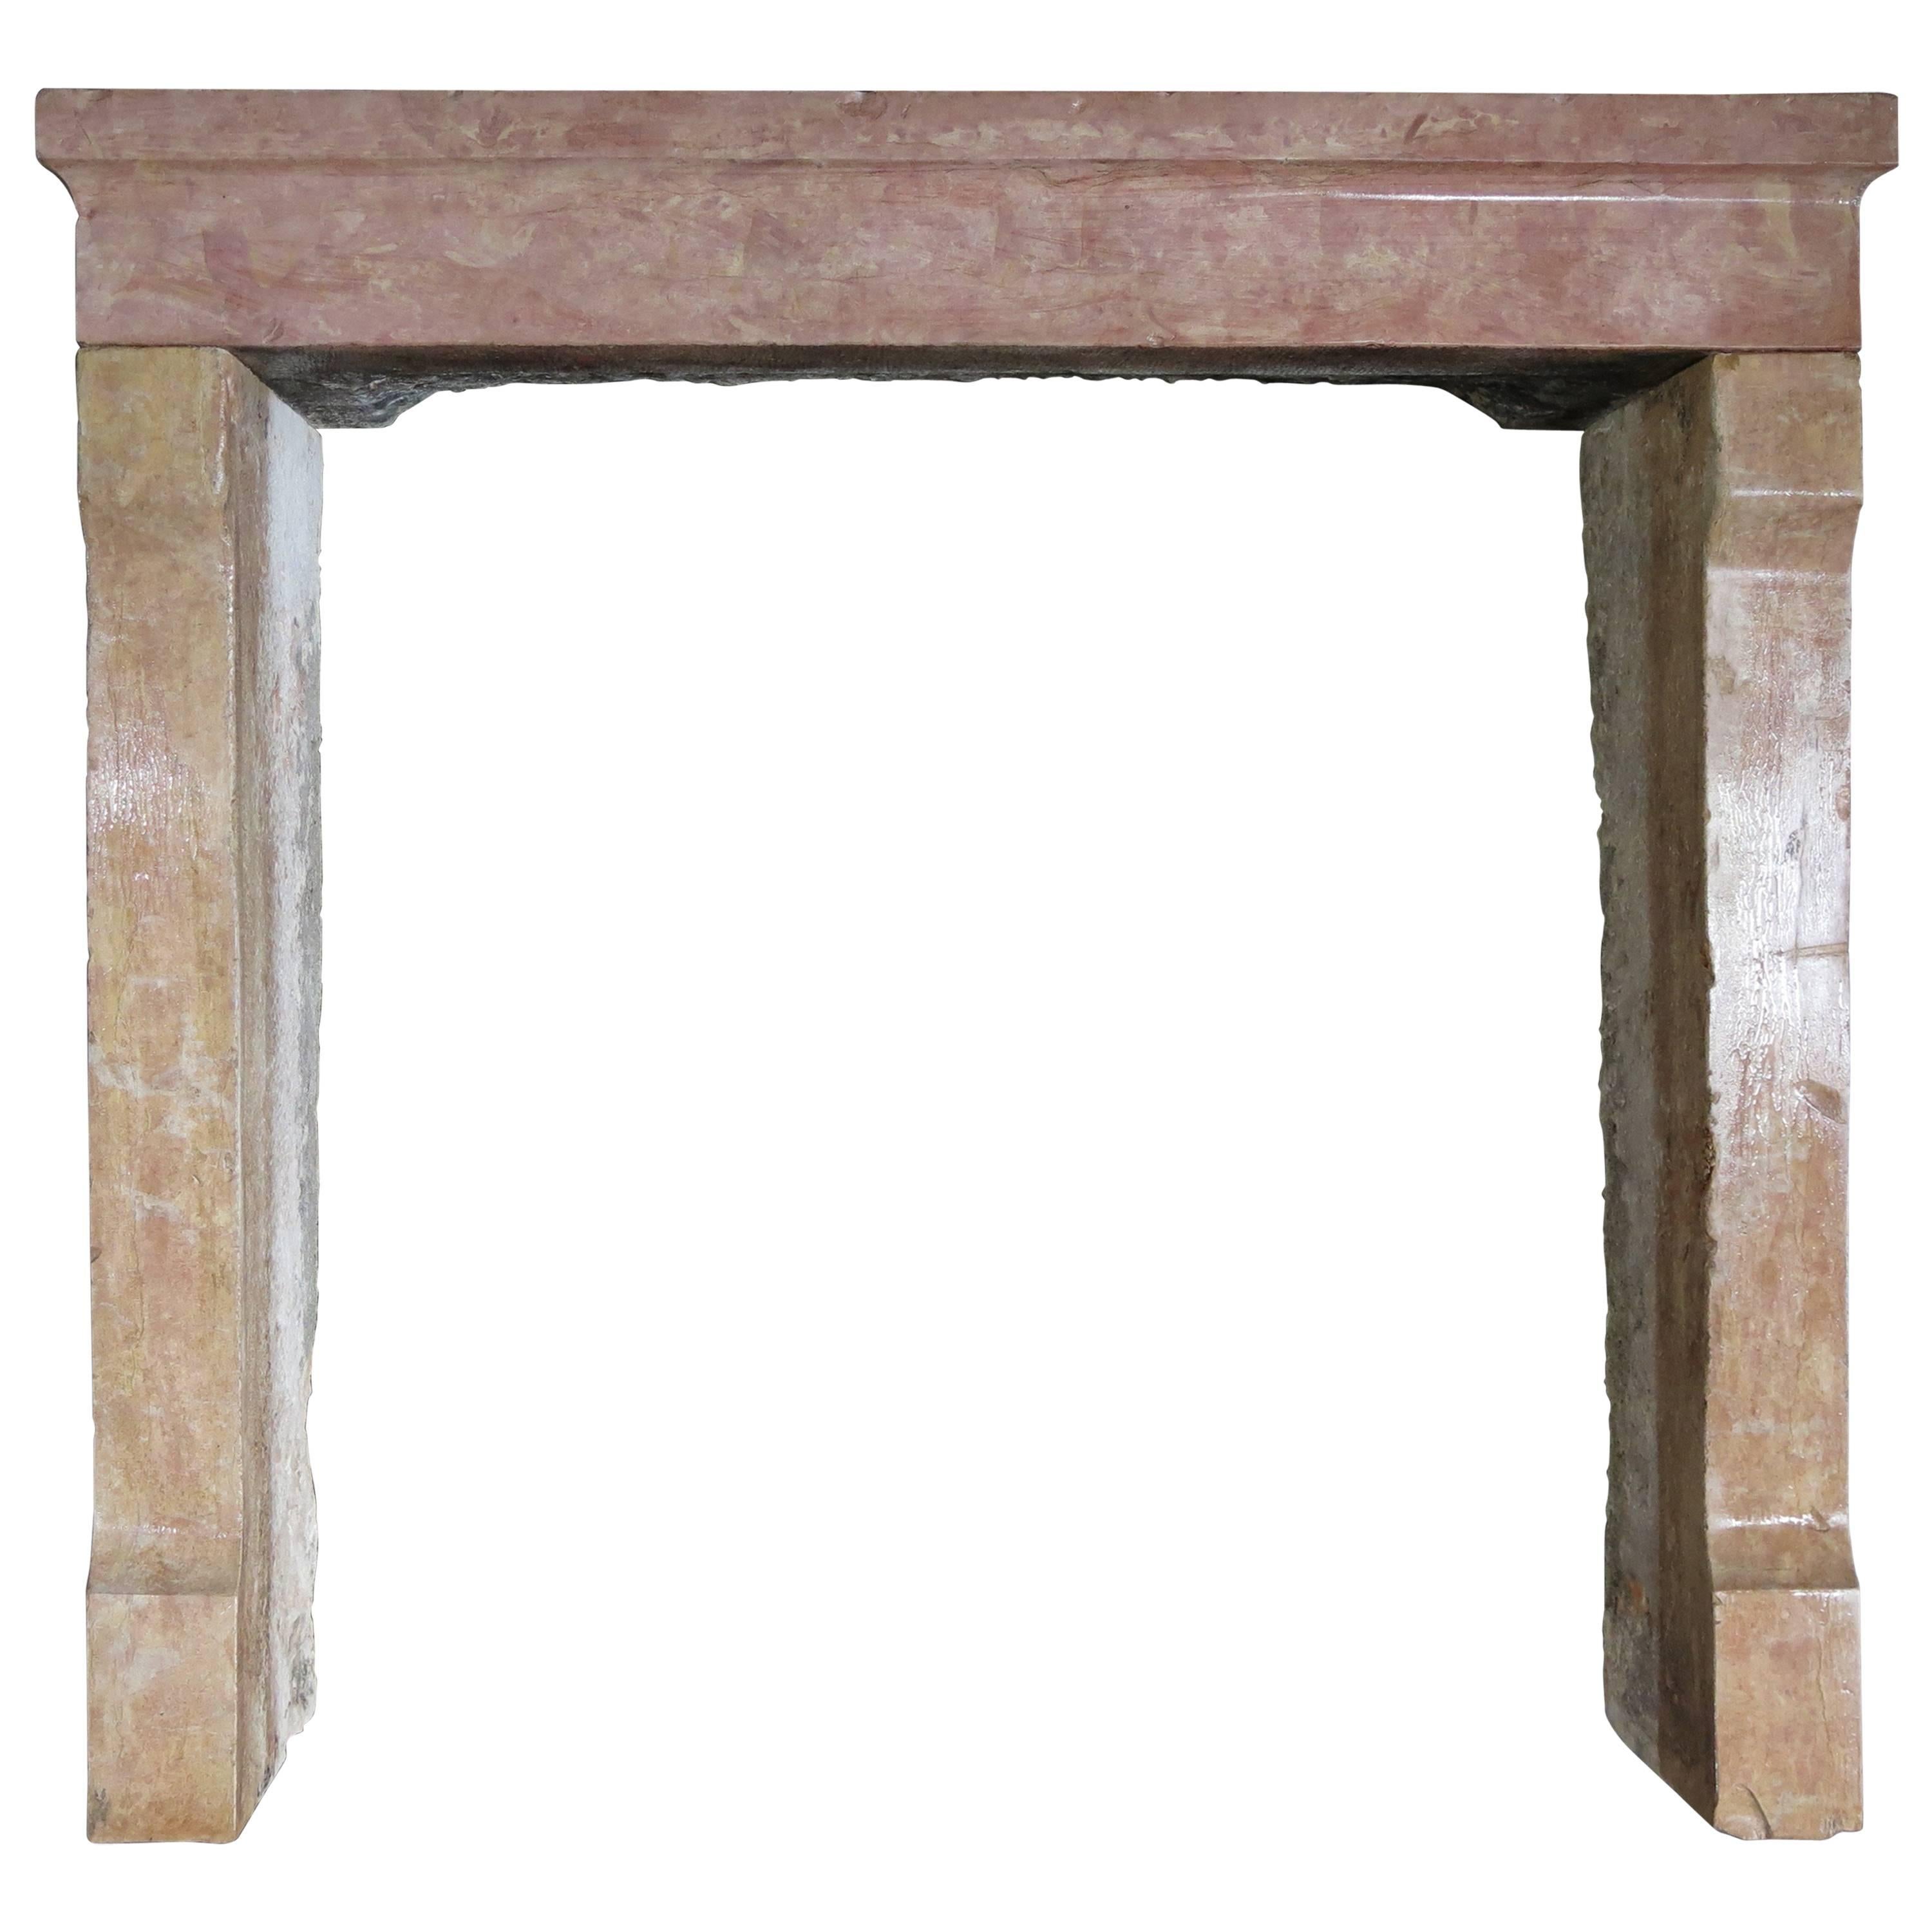 Original Contemporary French Antique Fireplace in Marble-Stone, Paris, 1800s For Sale